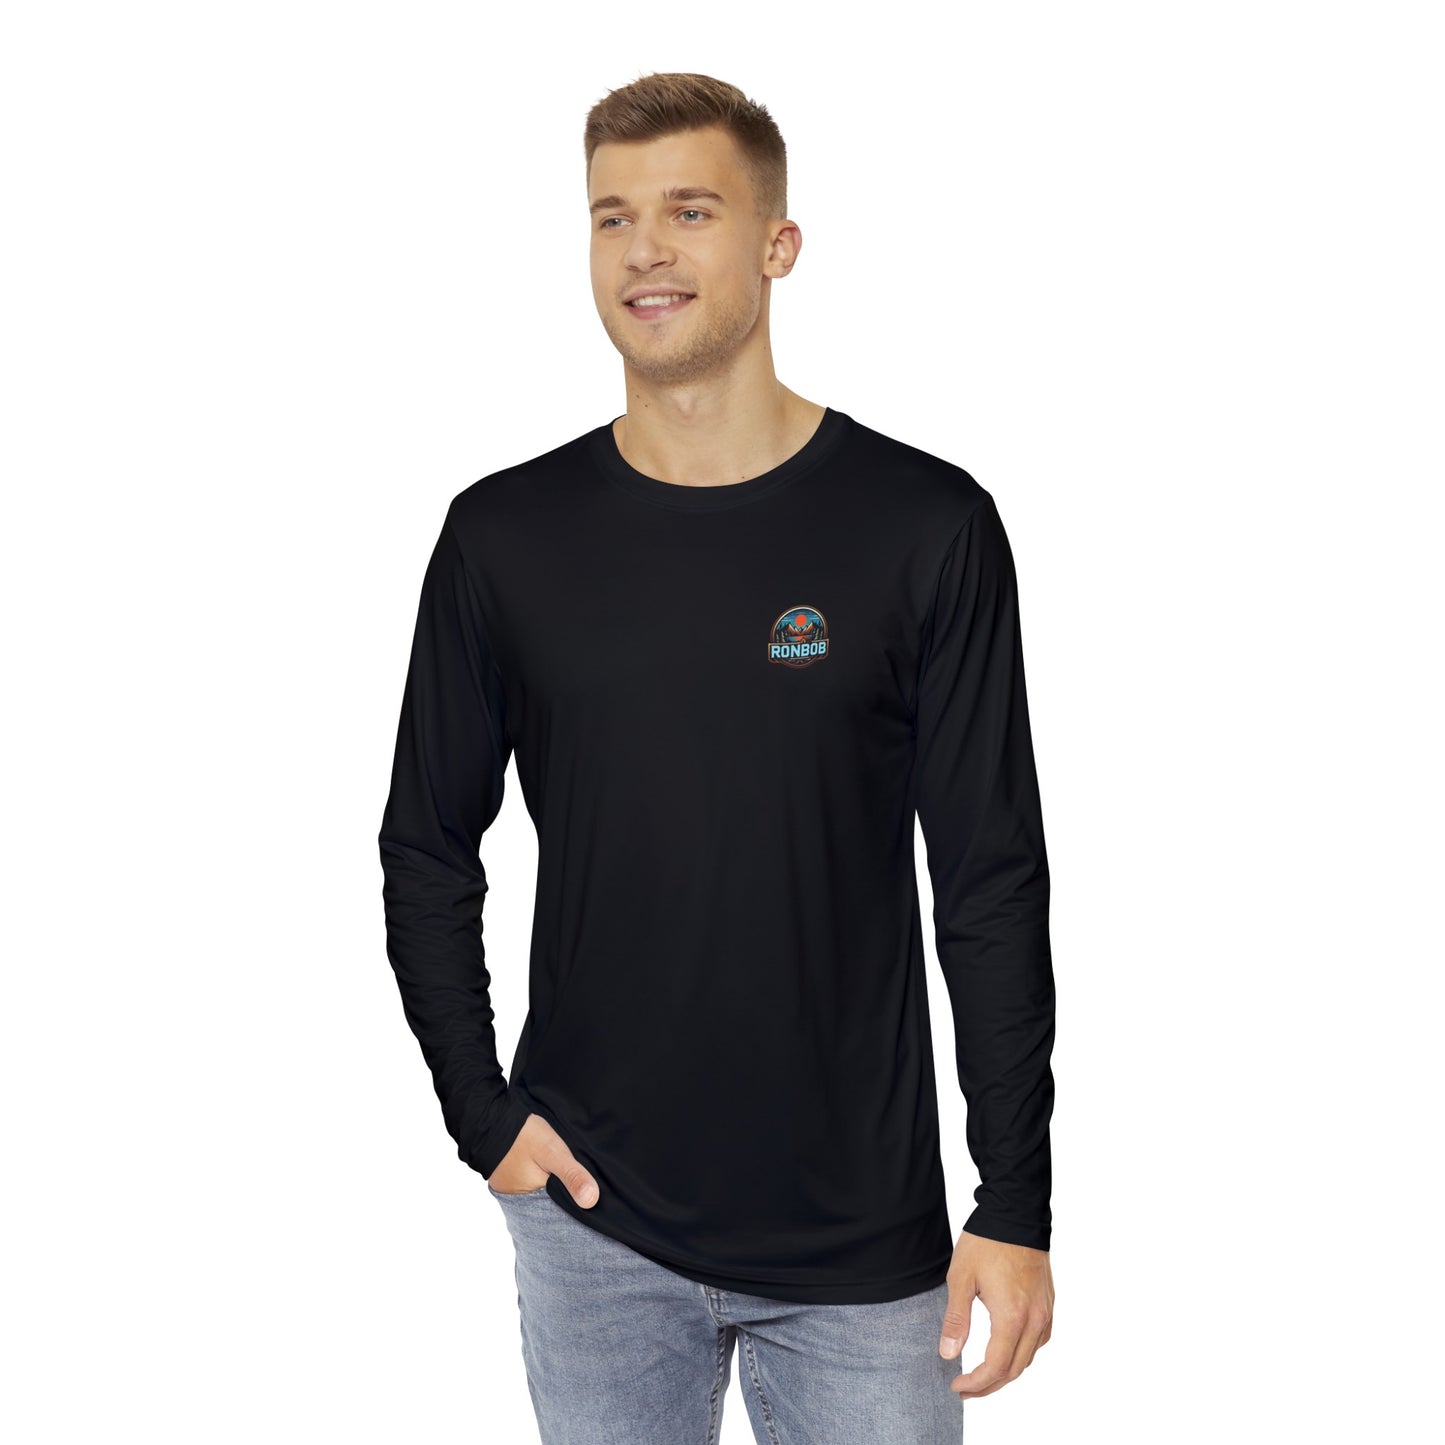 Polyester PacNW Mt. Cabin Long Sleeve T-Shirt (Black)